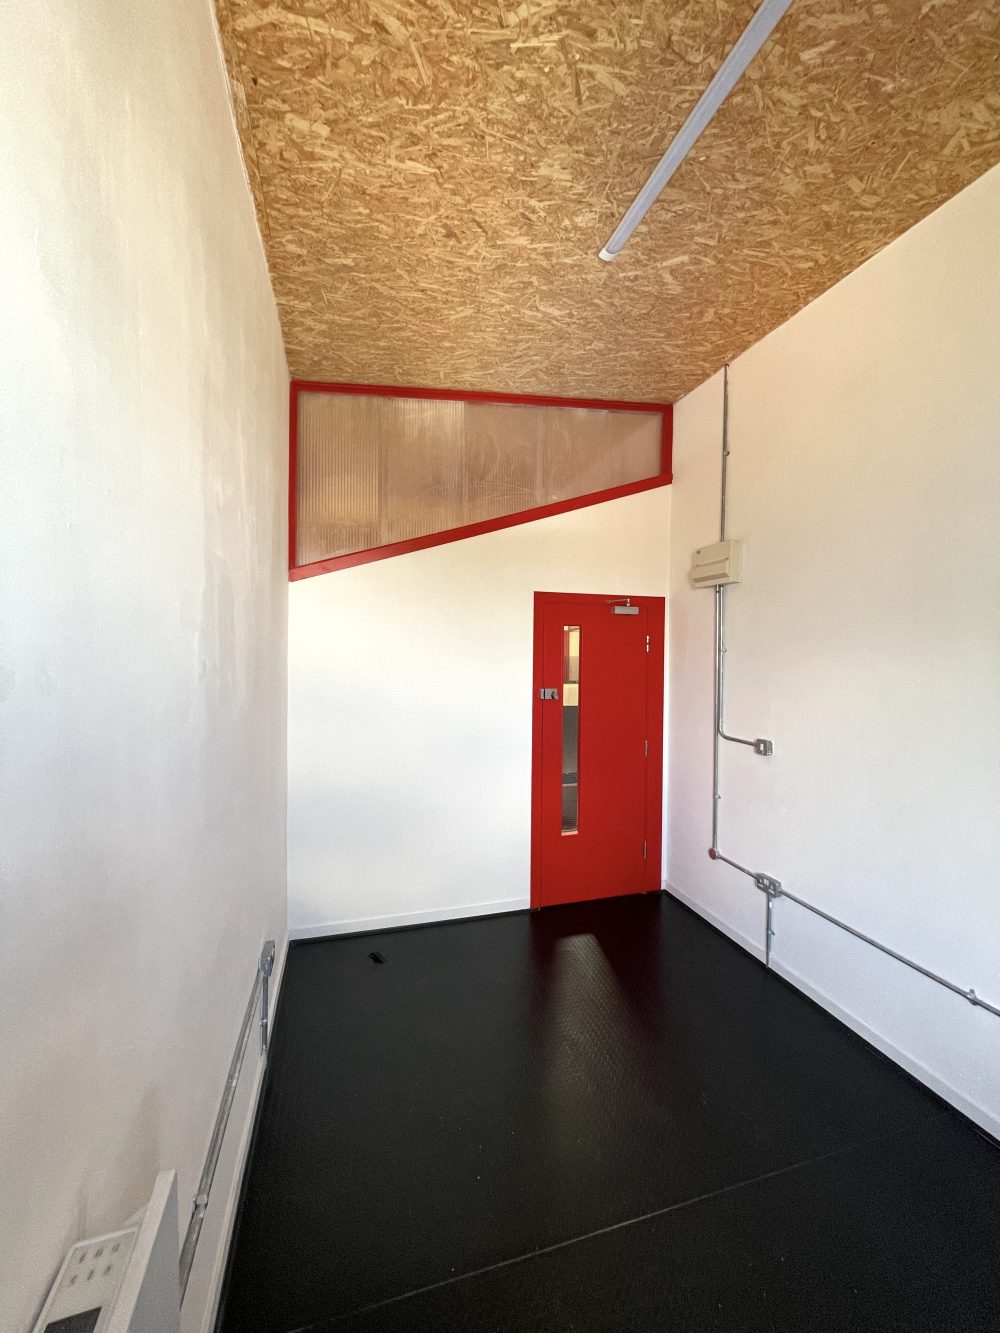 N4 Manor House Eade Road 1st Floor Unit To rent in Creative Warehouse Hub North London46